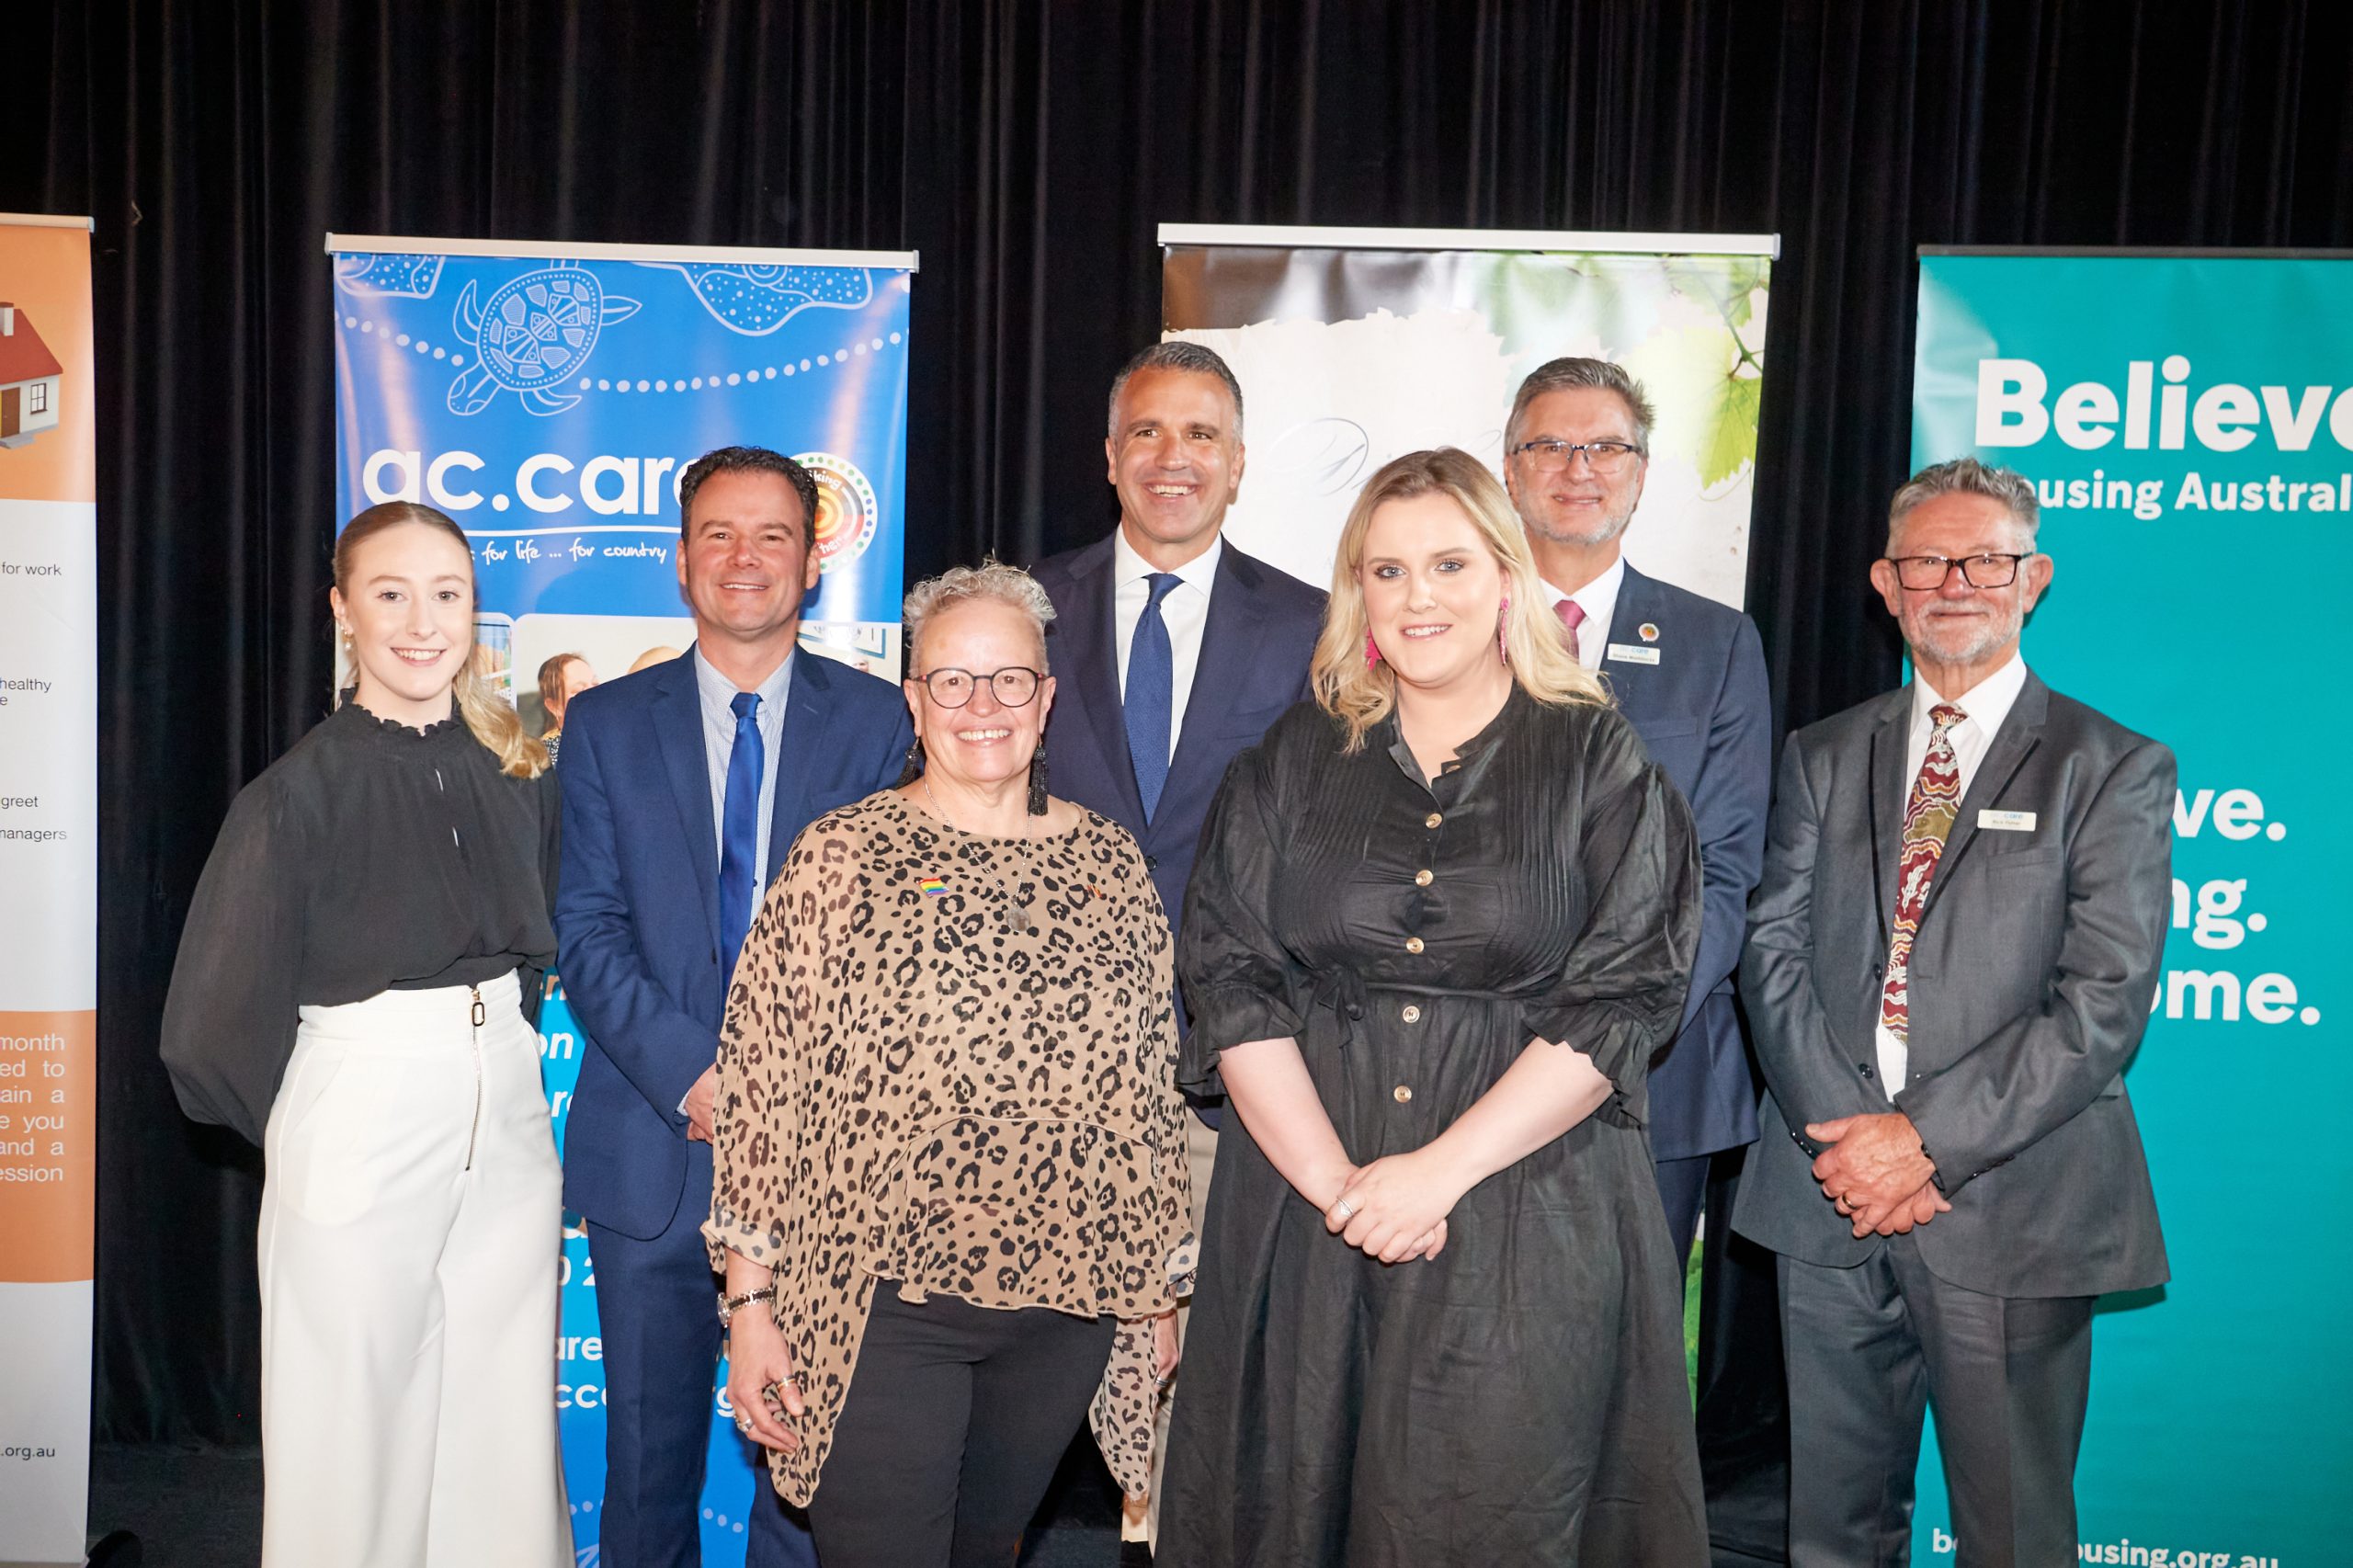 UNITED: Emcee Di Ind (front left) and social media volunteer Caitlin Kennedy with videographer Teagan Hill (back left), event coordinator Jason Wallace, Premier Peter Malinauskas, ac.care chief executive officer Shane Maddocks and ac.care chairperson Rick Fisher at the 2023 Limestone Coast Support Homeless People Luncheon.